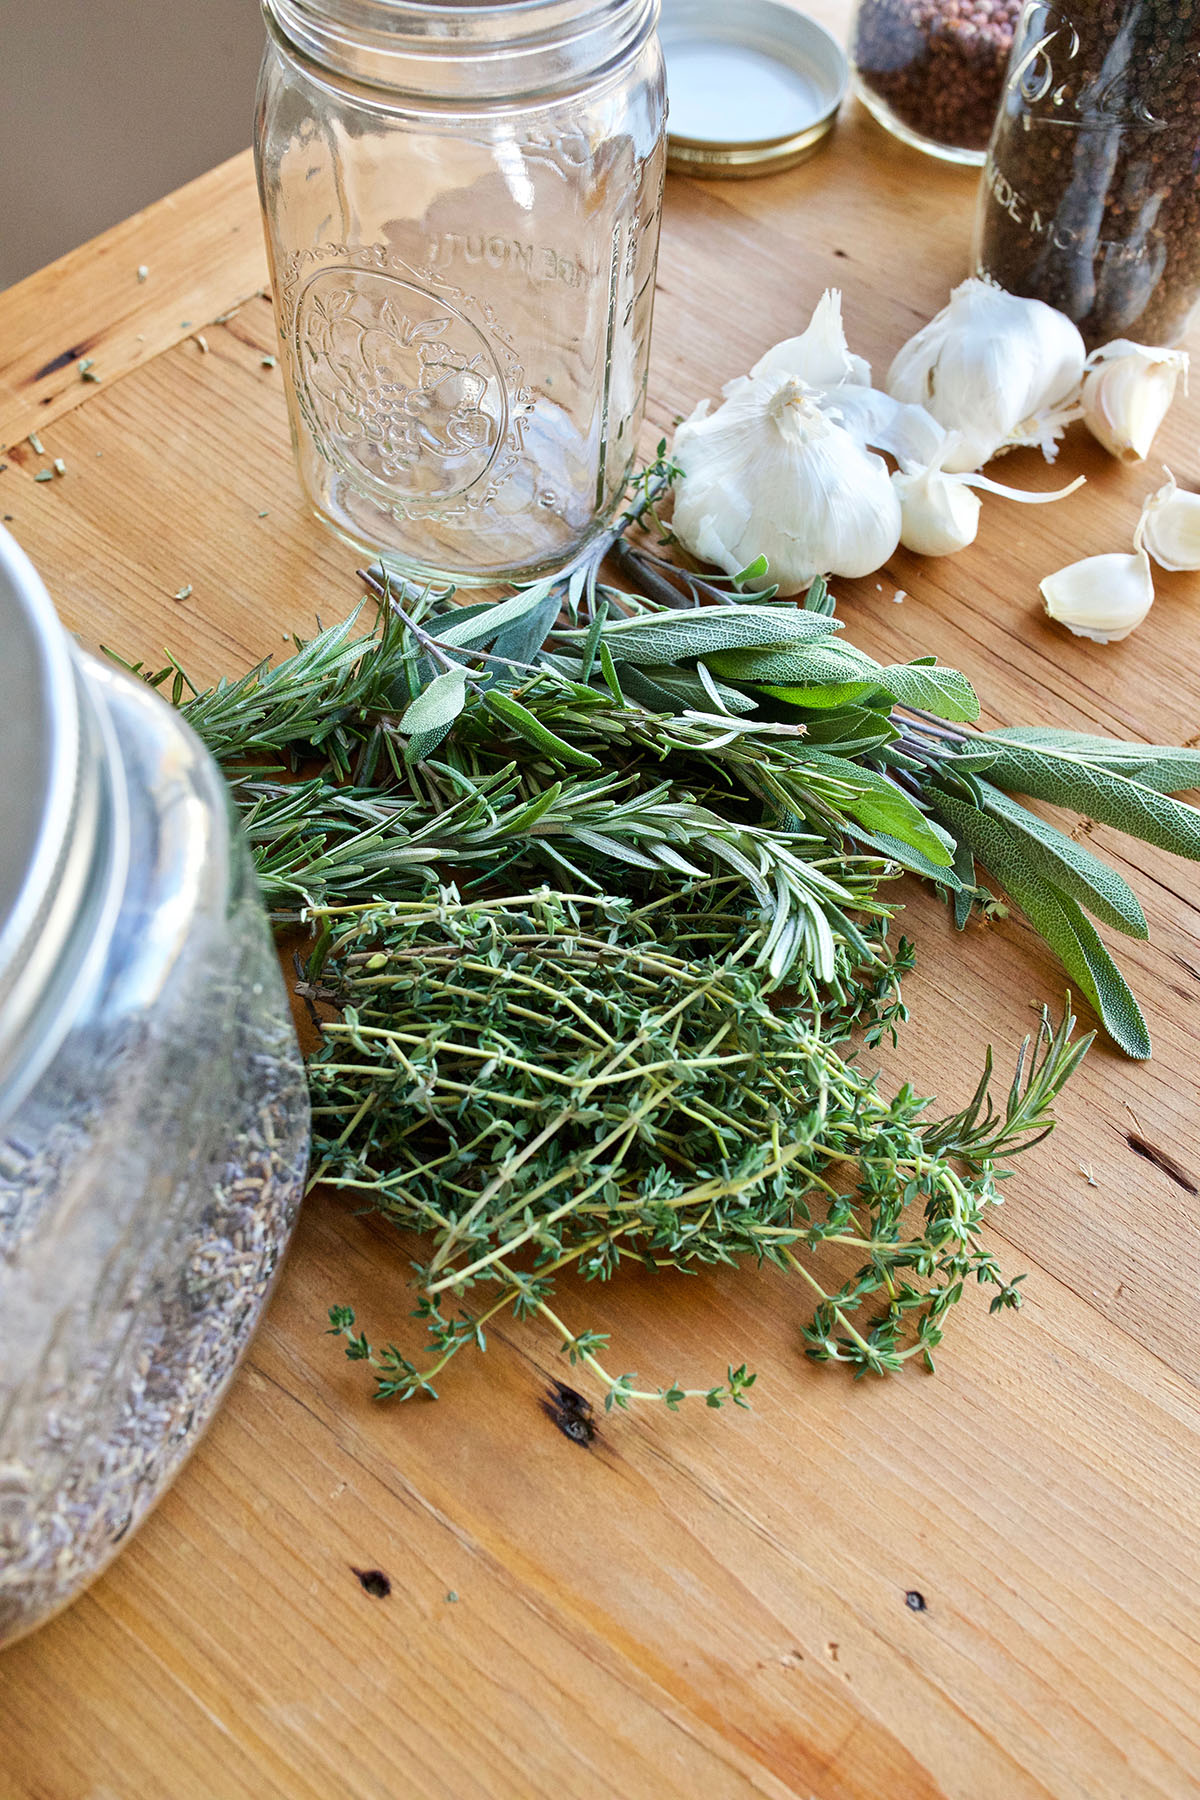 How to Make and Use the Legendary Four Thieves Vinegar Blend | Herbal Academy | Ever heard of the Four Thieves Vinegar blend? Come learn the folklore surrounding this blend, how it's used to support wellness, and how to make it.